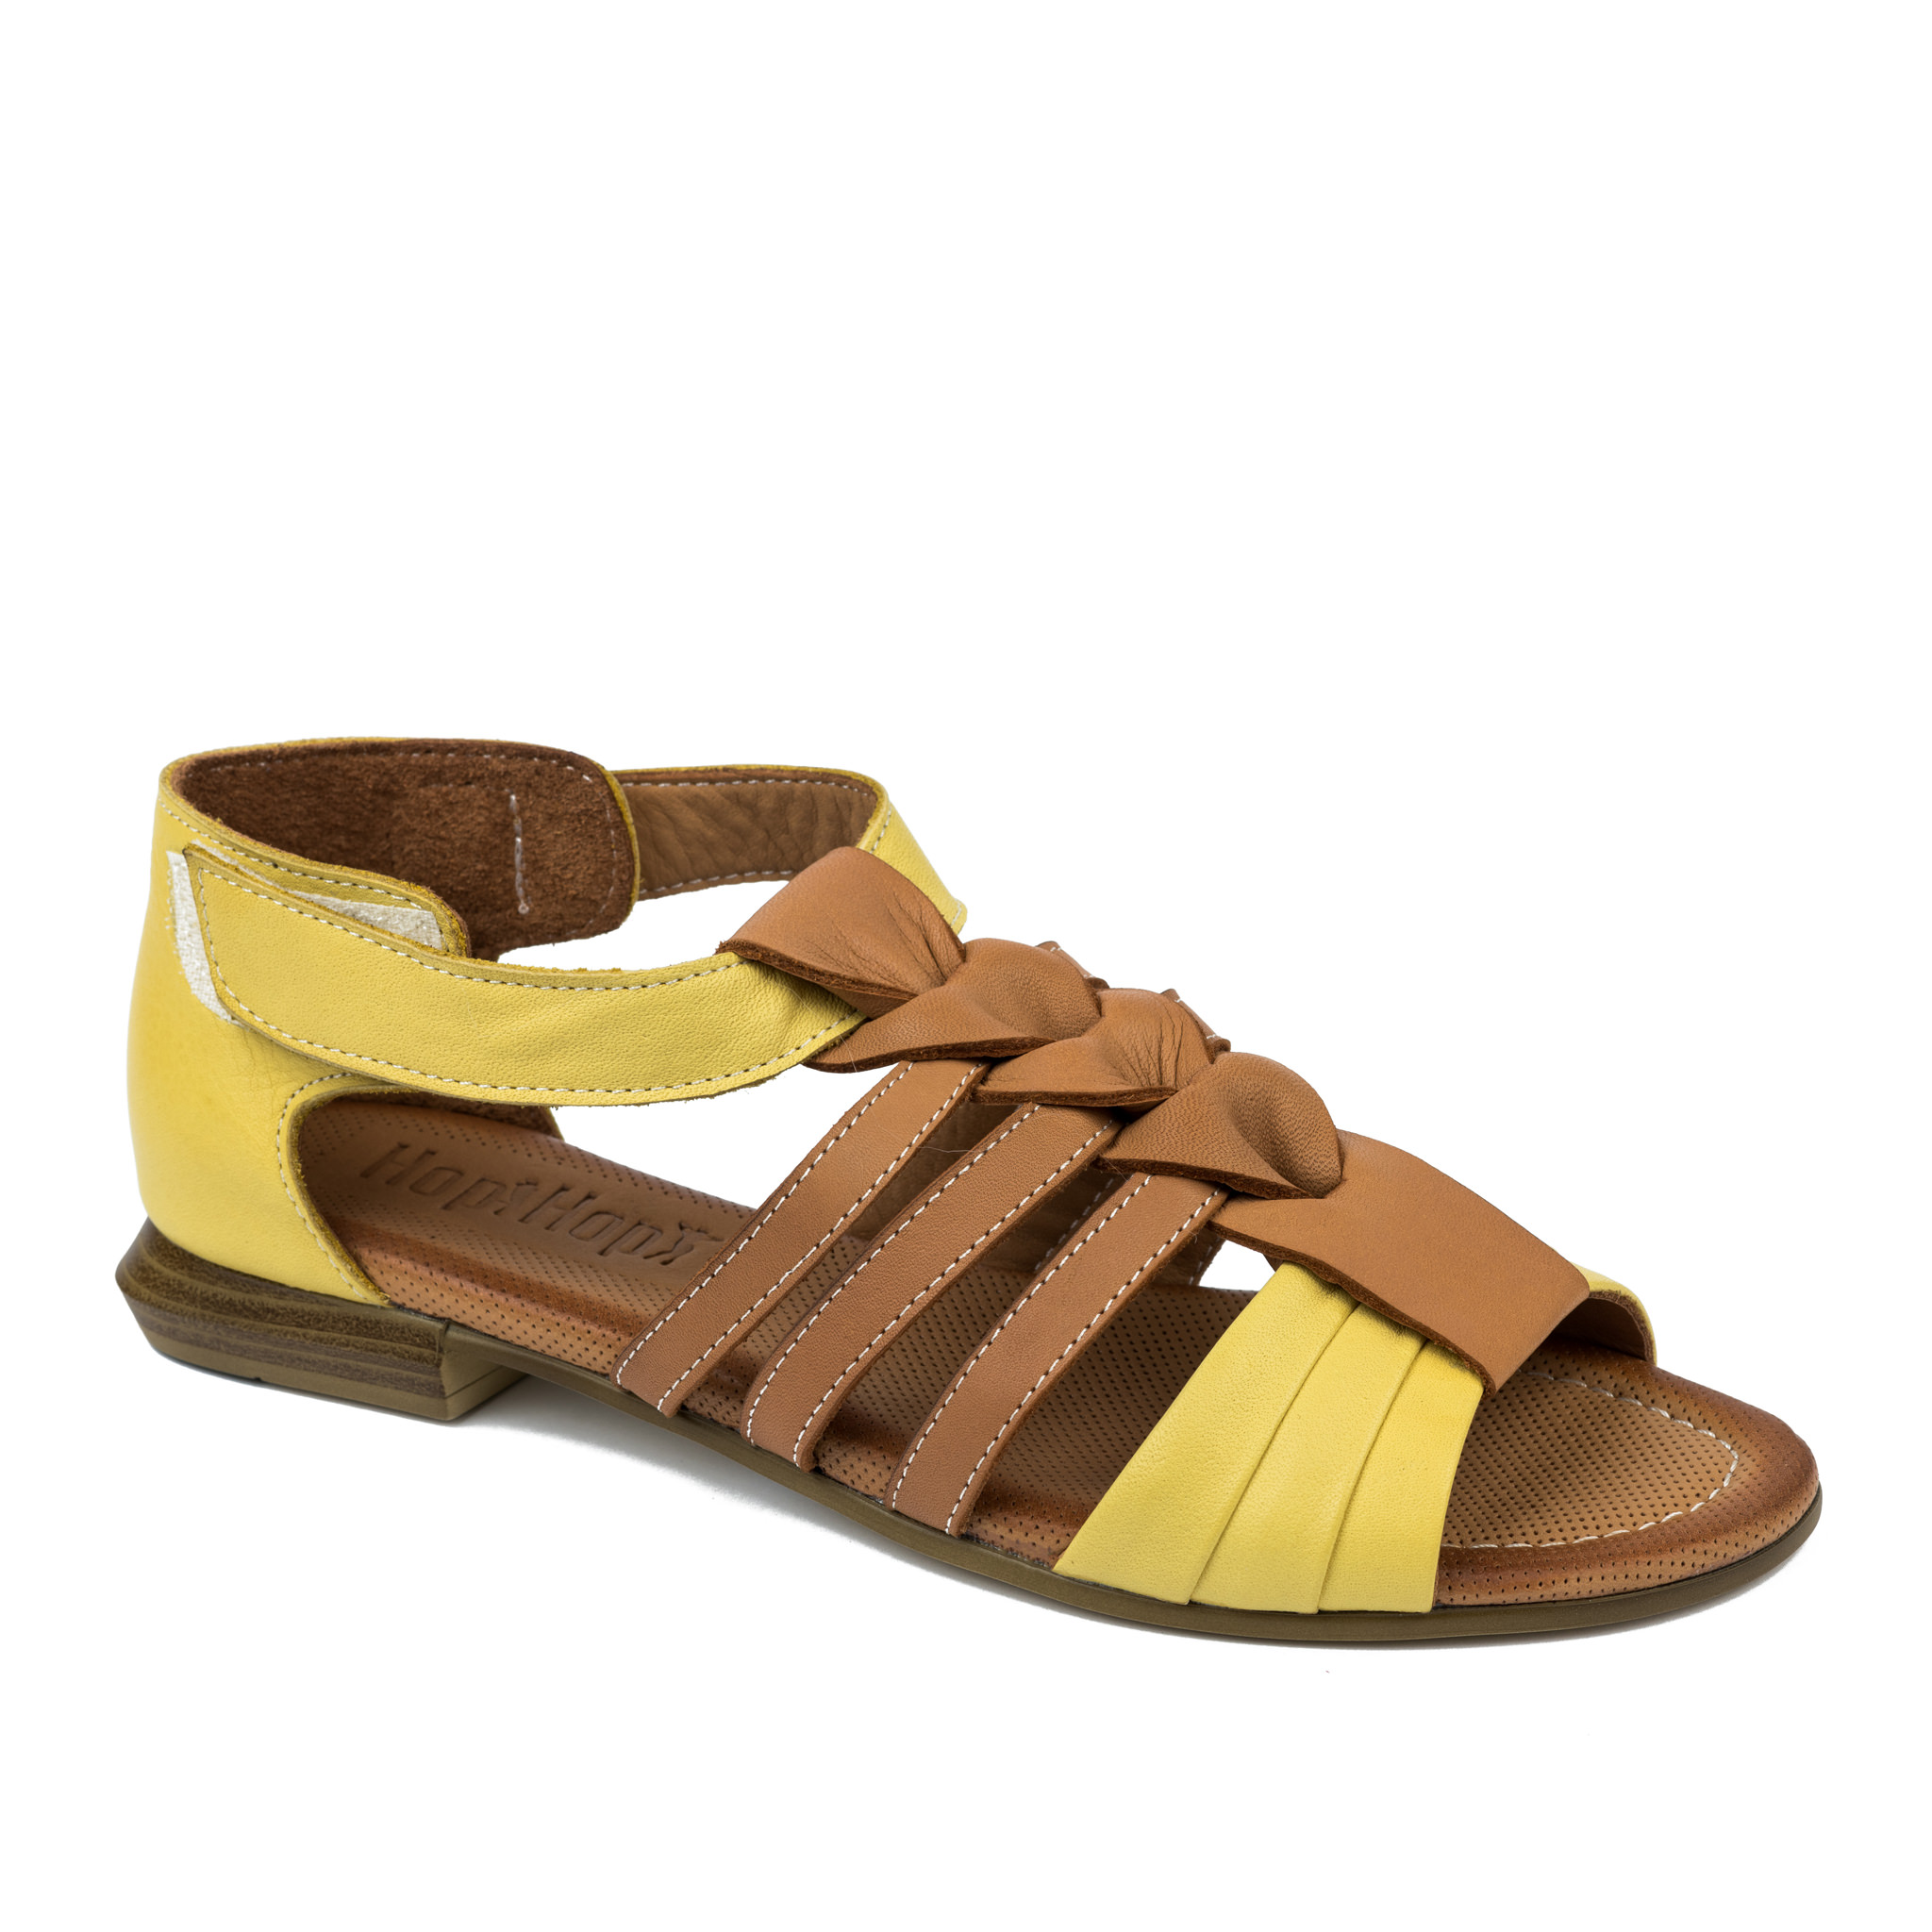 Leather sandals A682 - YELLOW